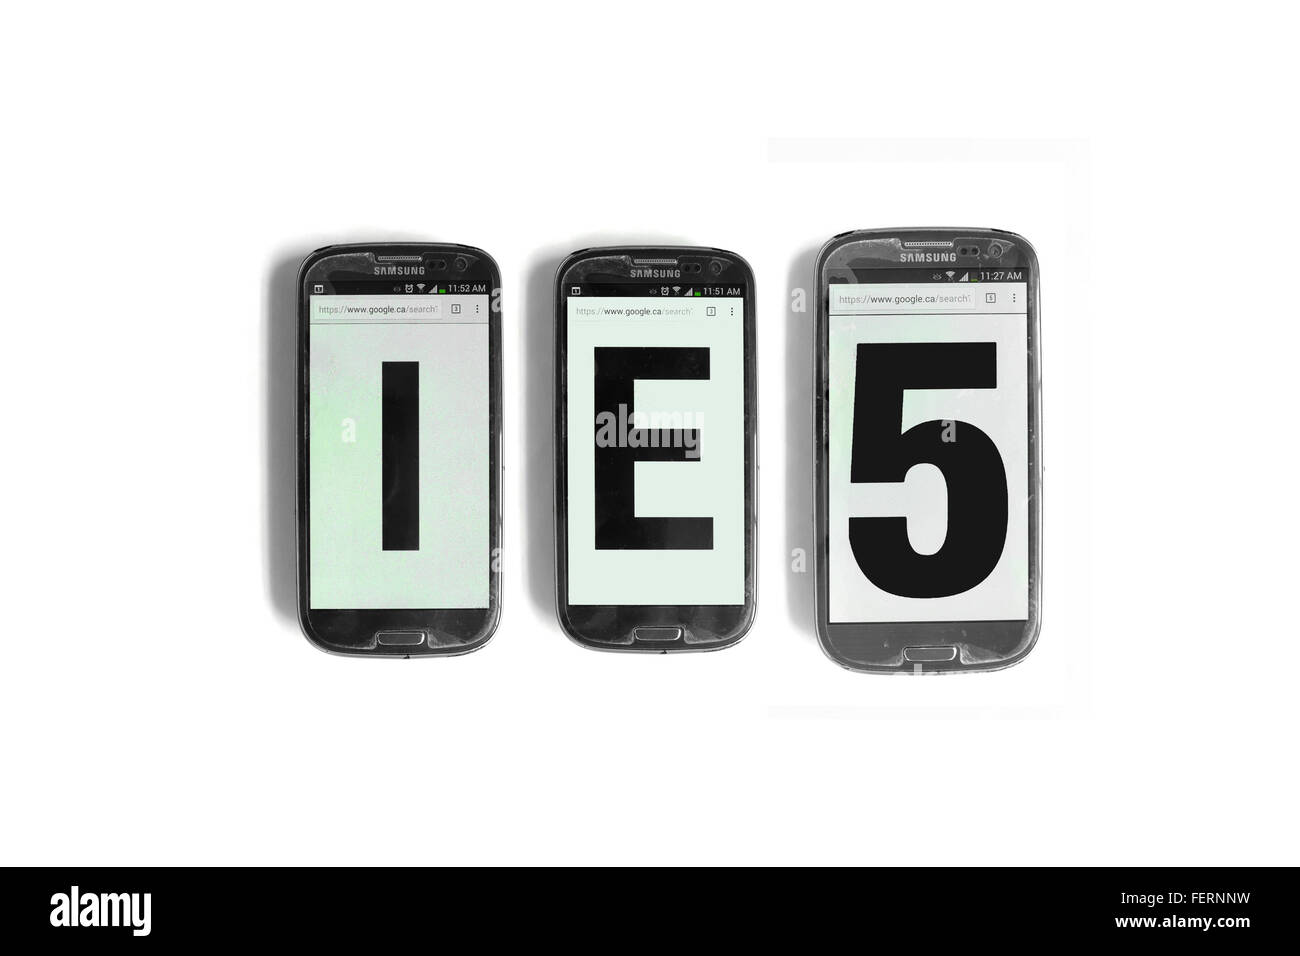 IE5 on the screens of smartphones photographed against a  white background. Stock Photo